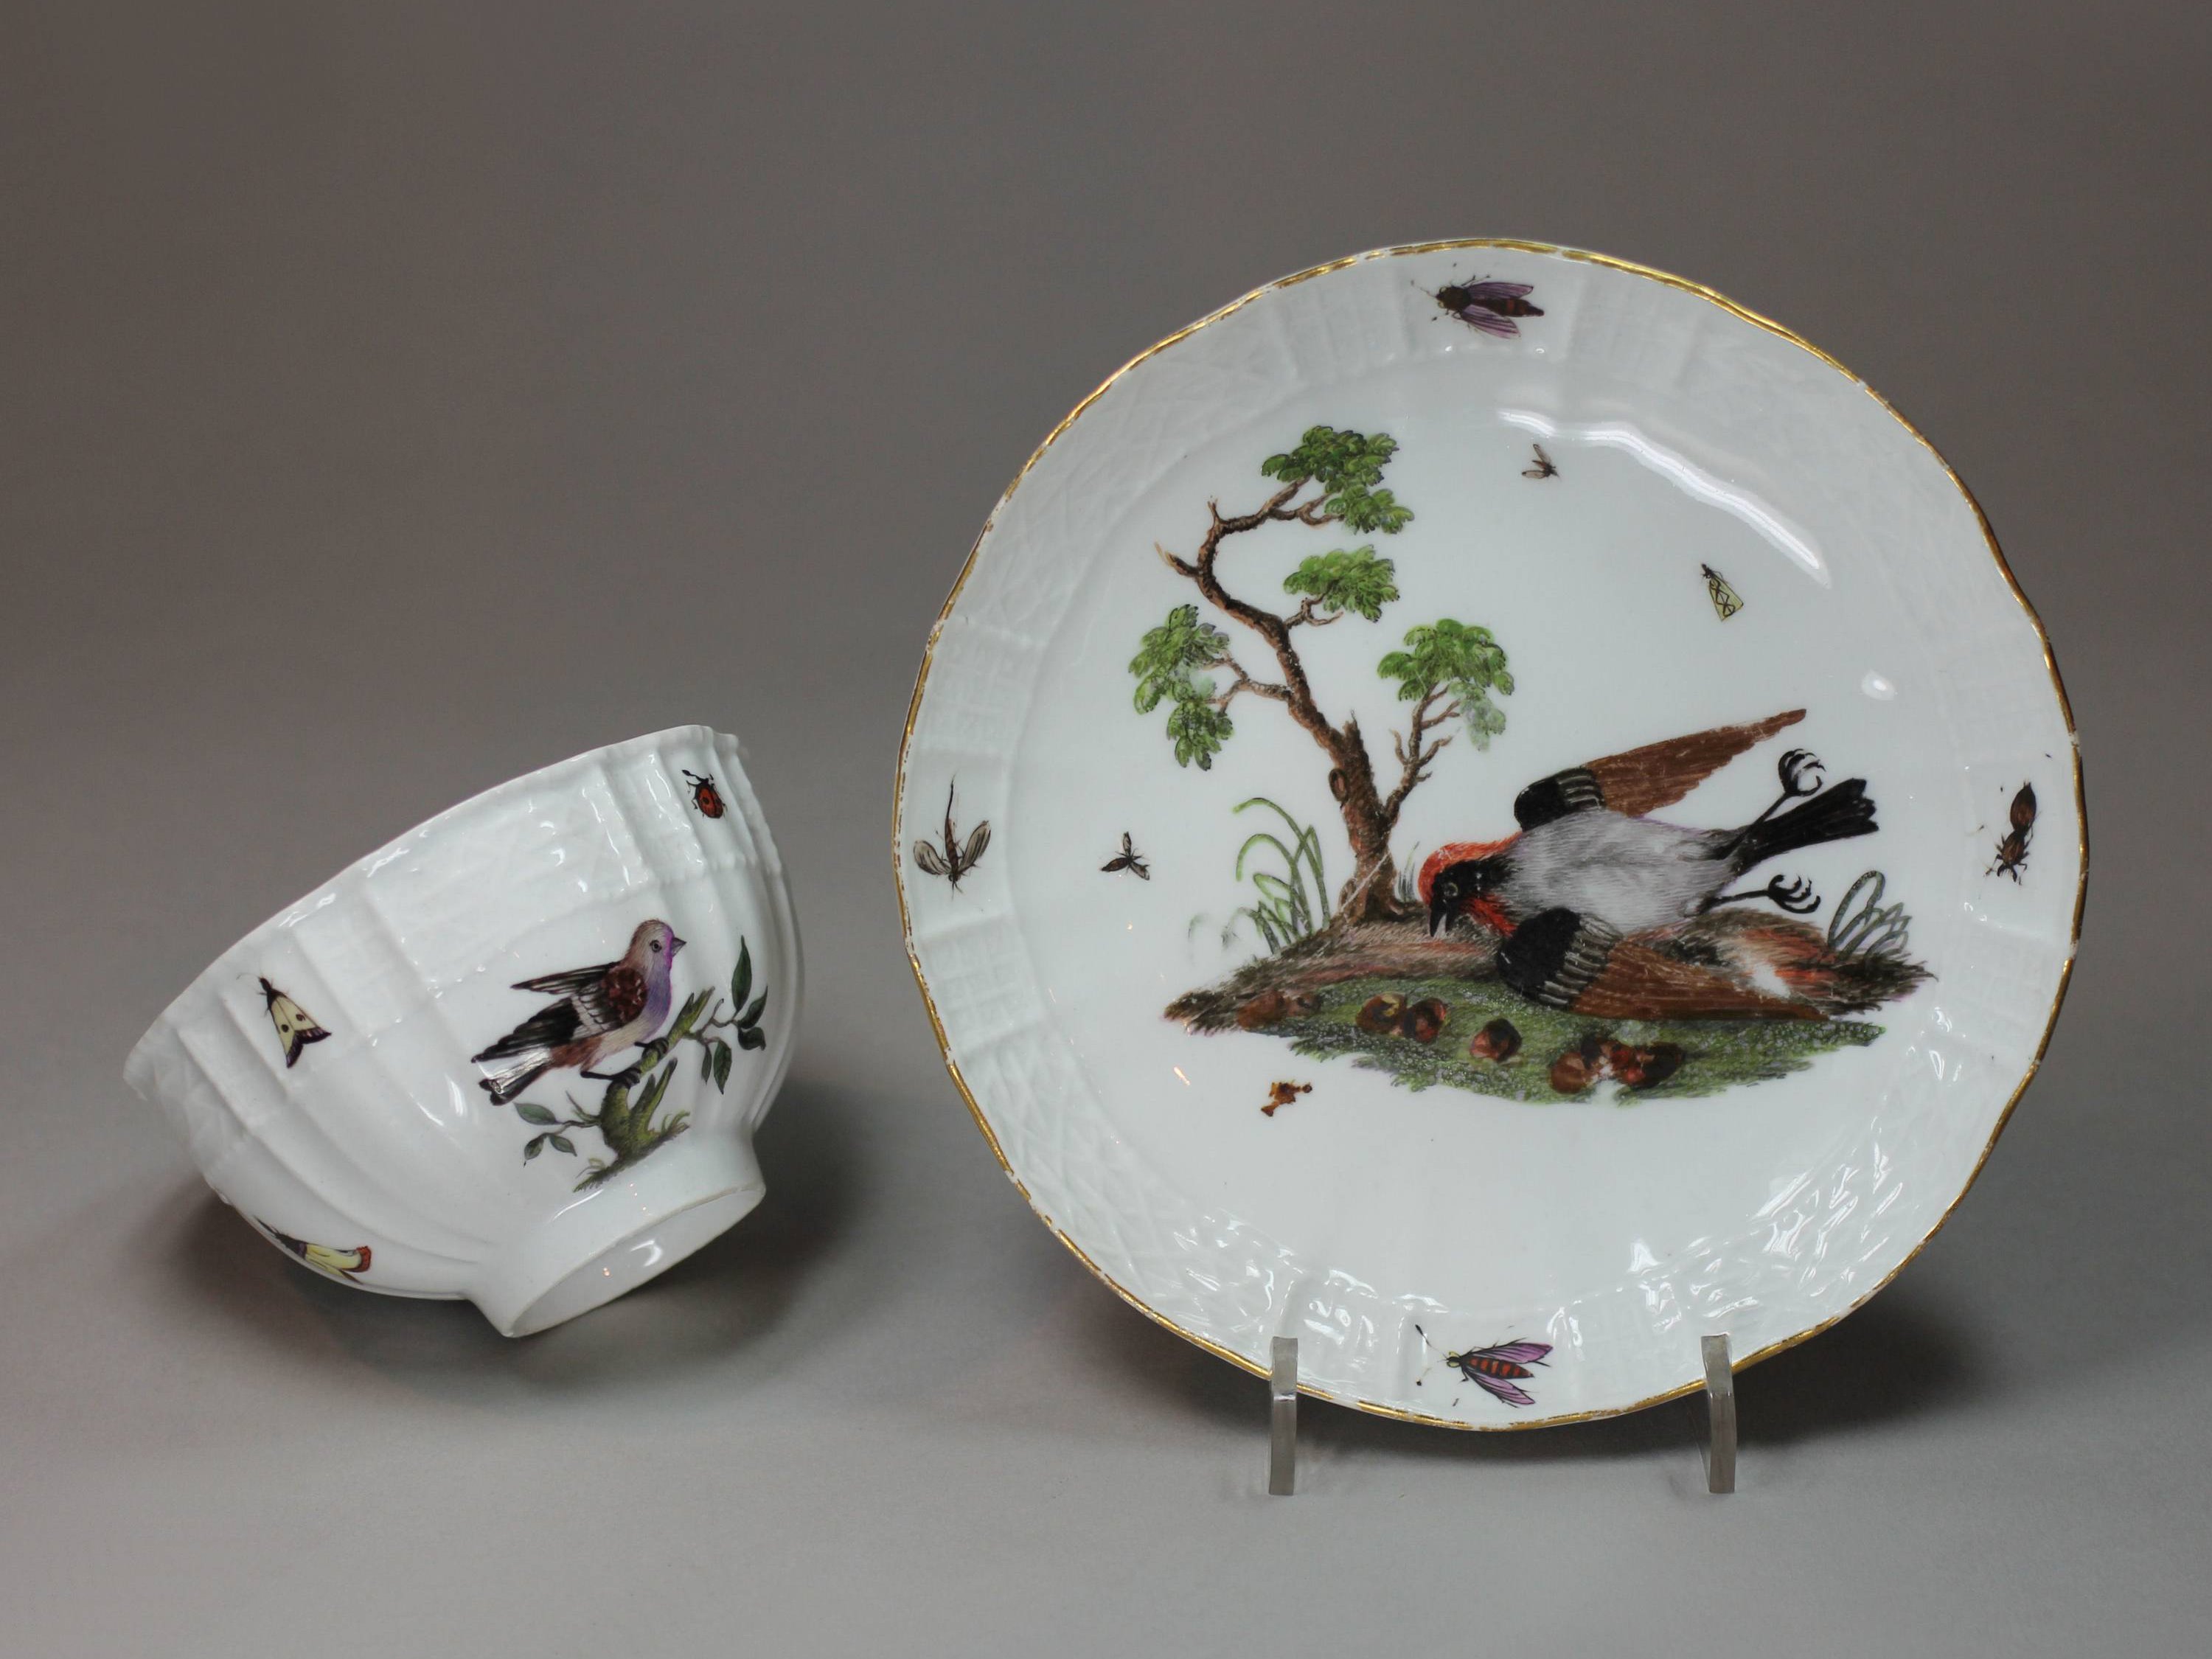 Meissen Ornithological Teabowl and Saucer, Circa 1760-70